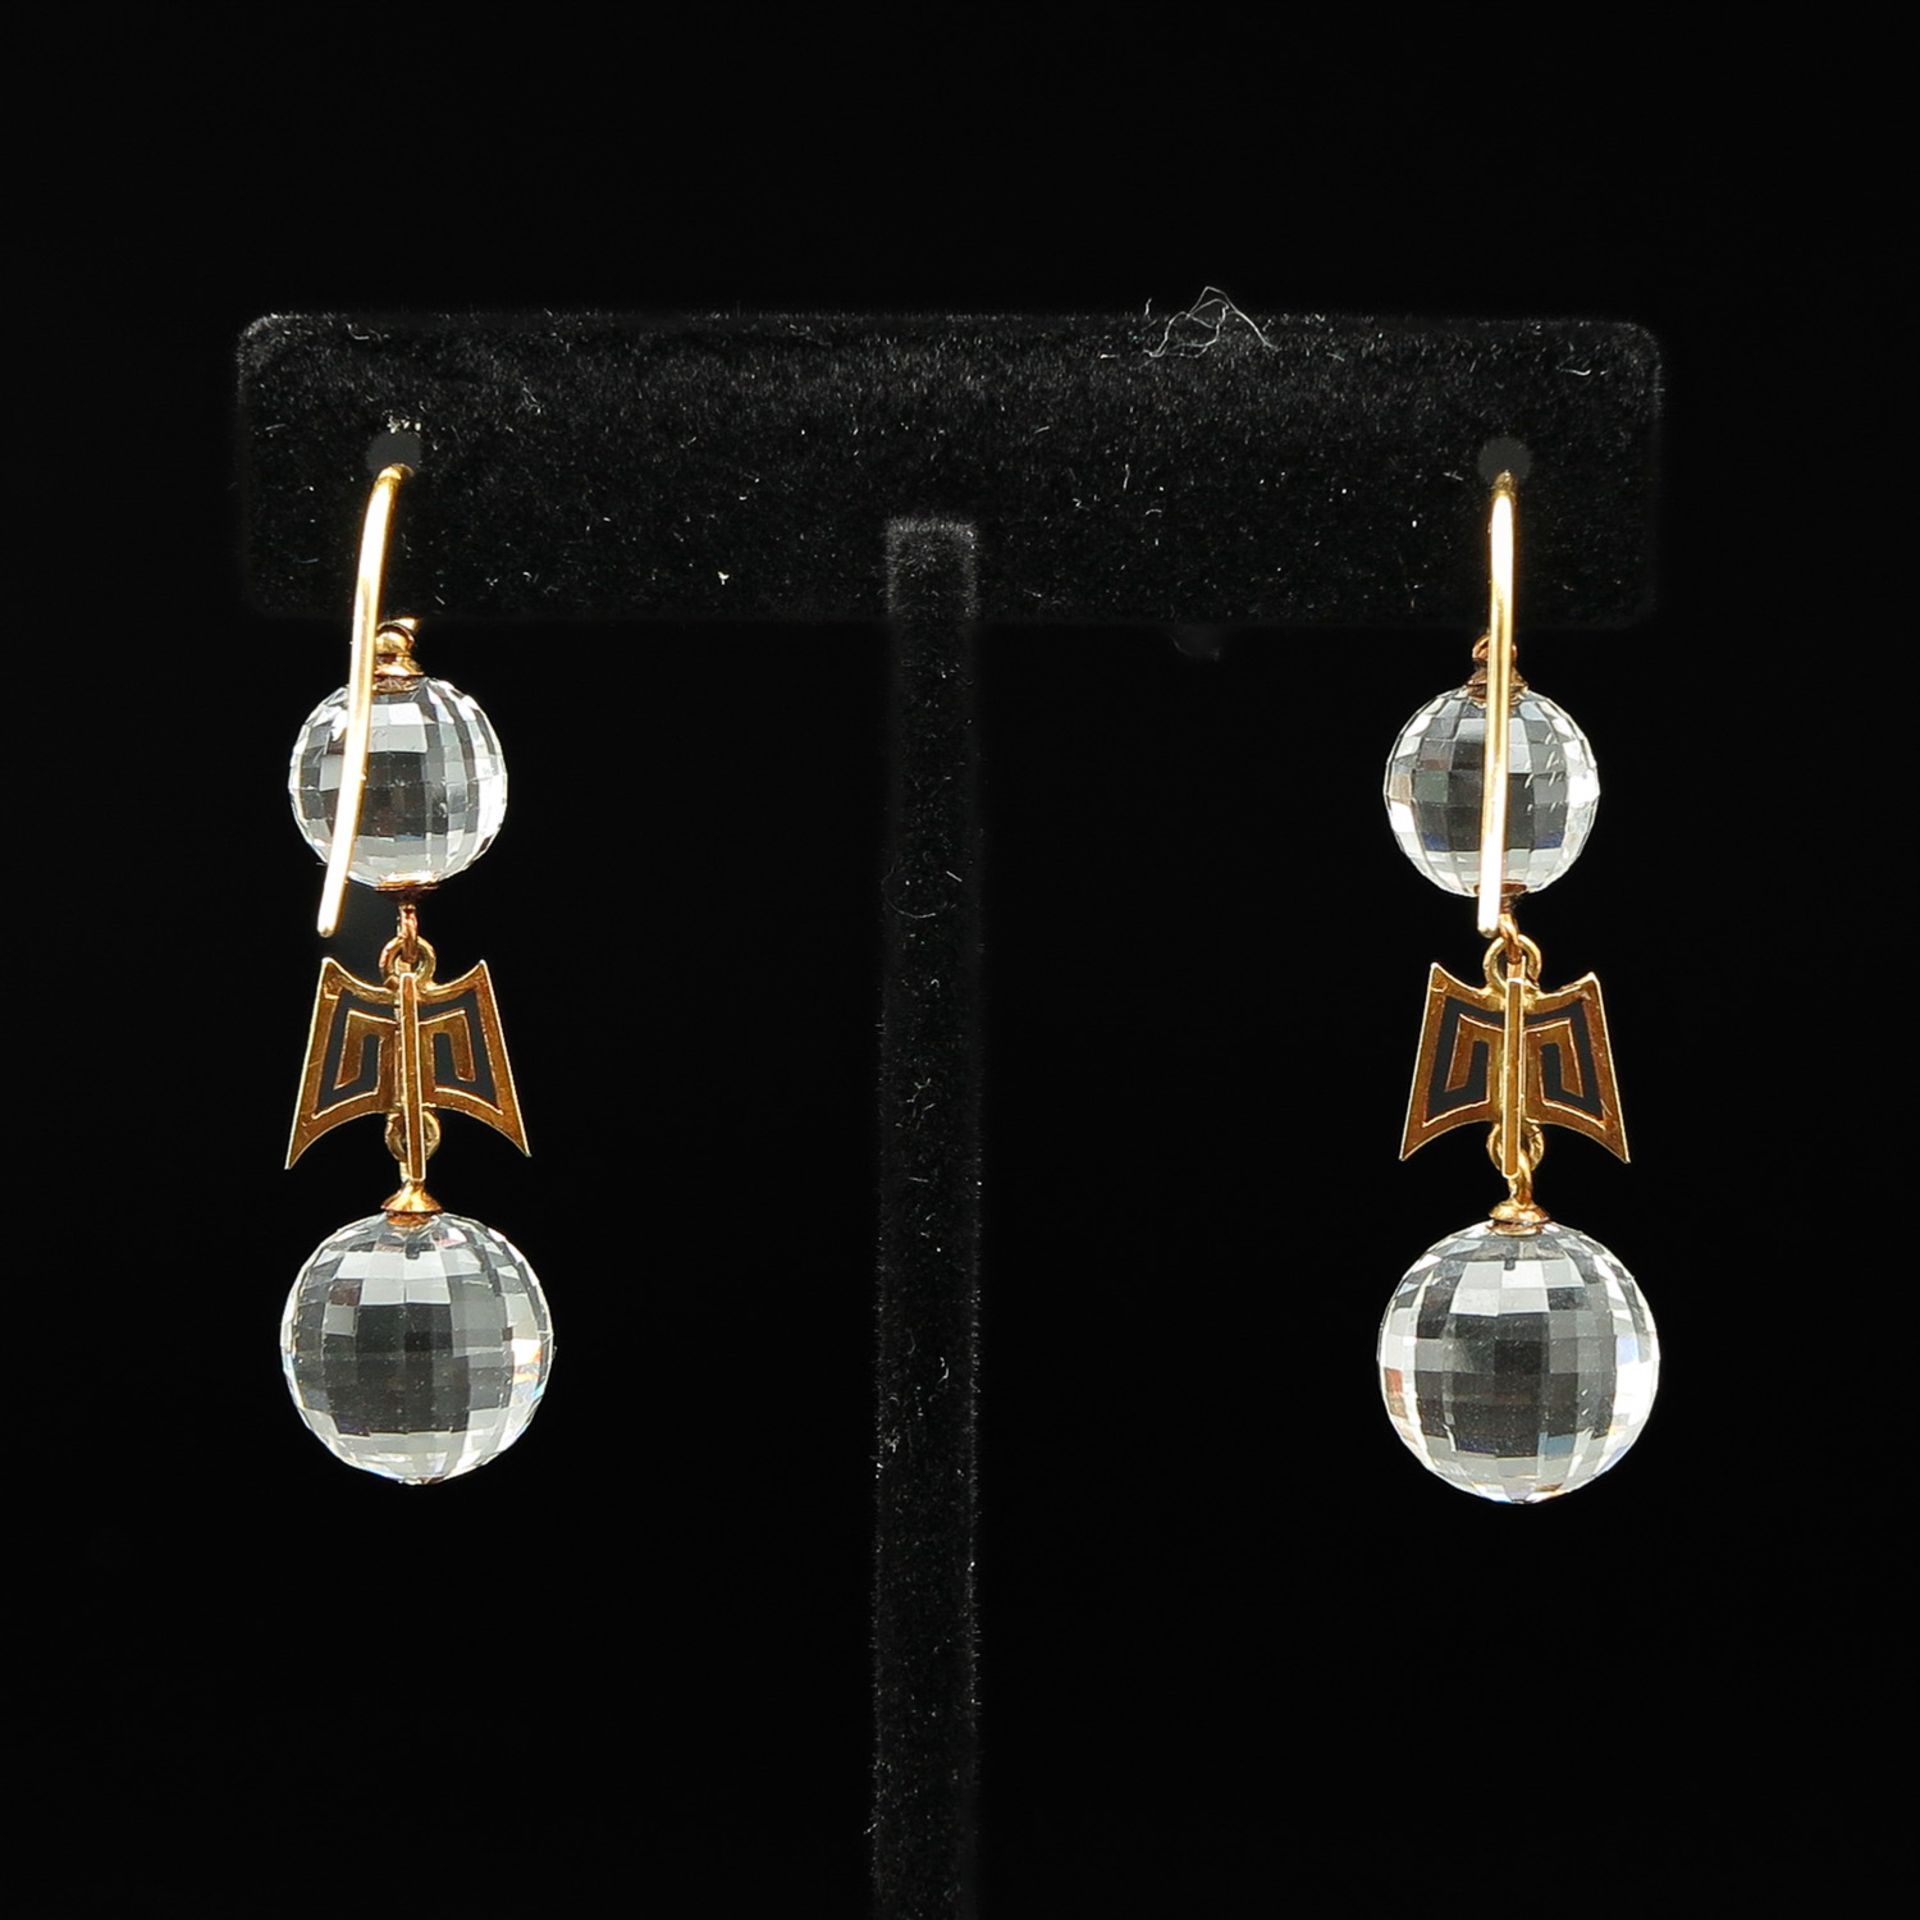 A Pair of Earring Set with Rock Crystal - Image 2 of 4